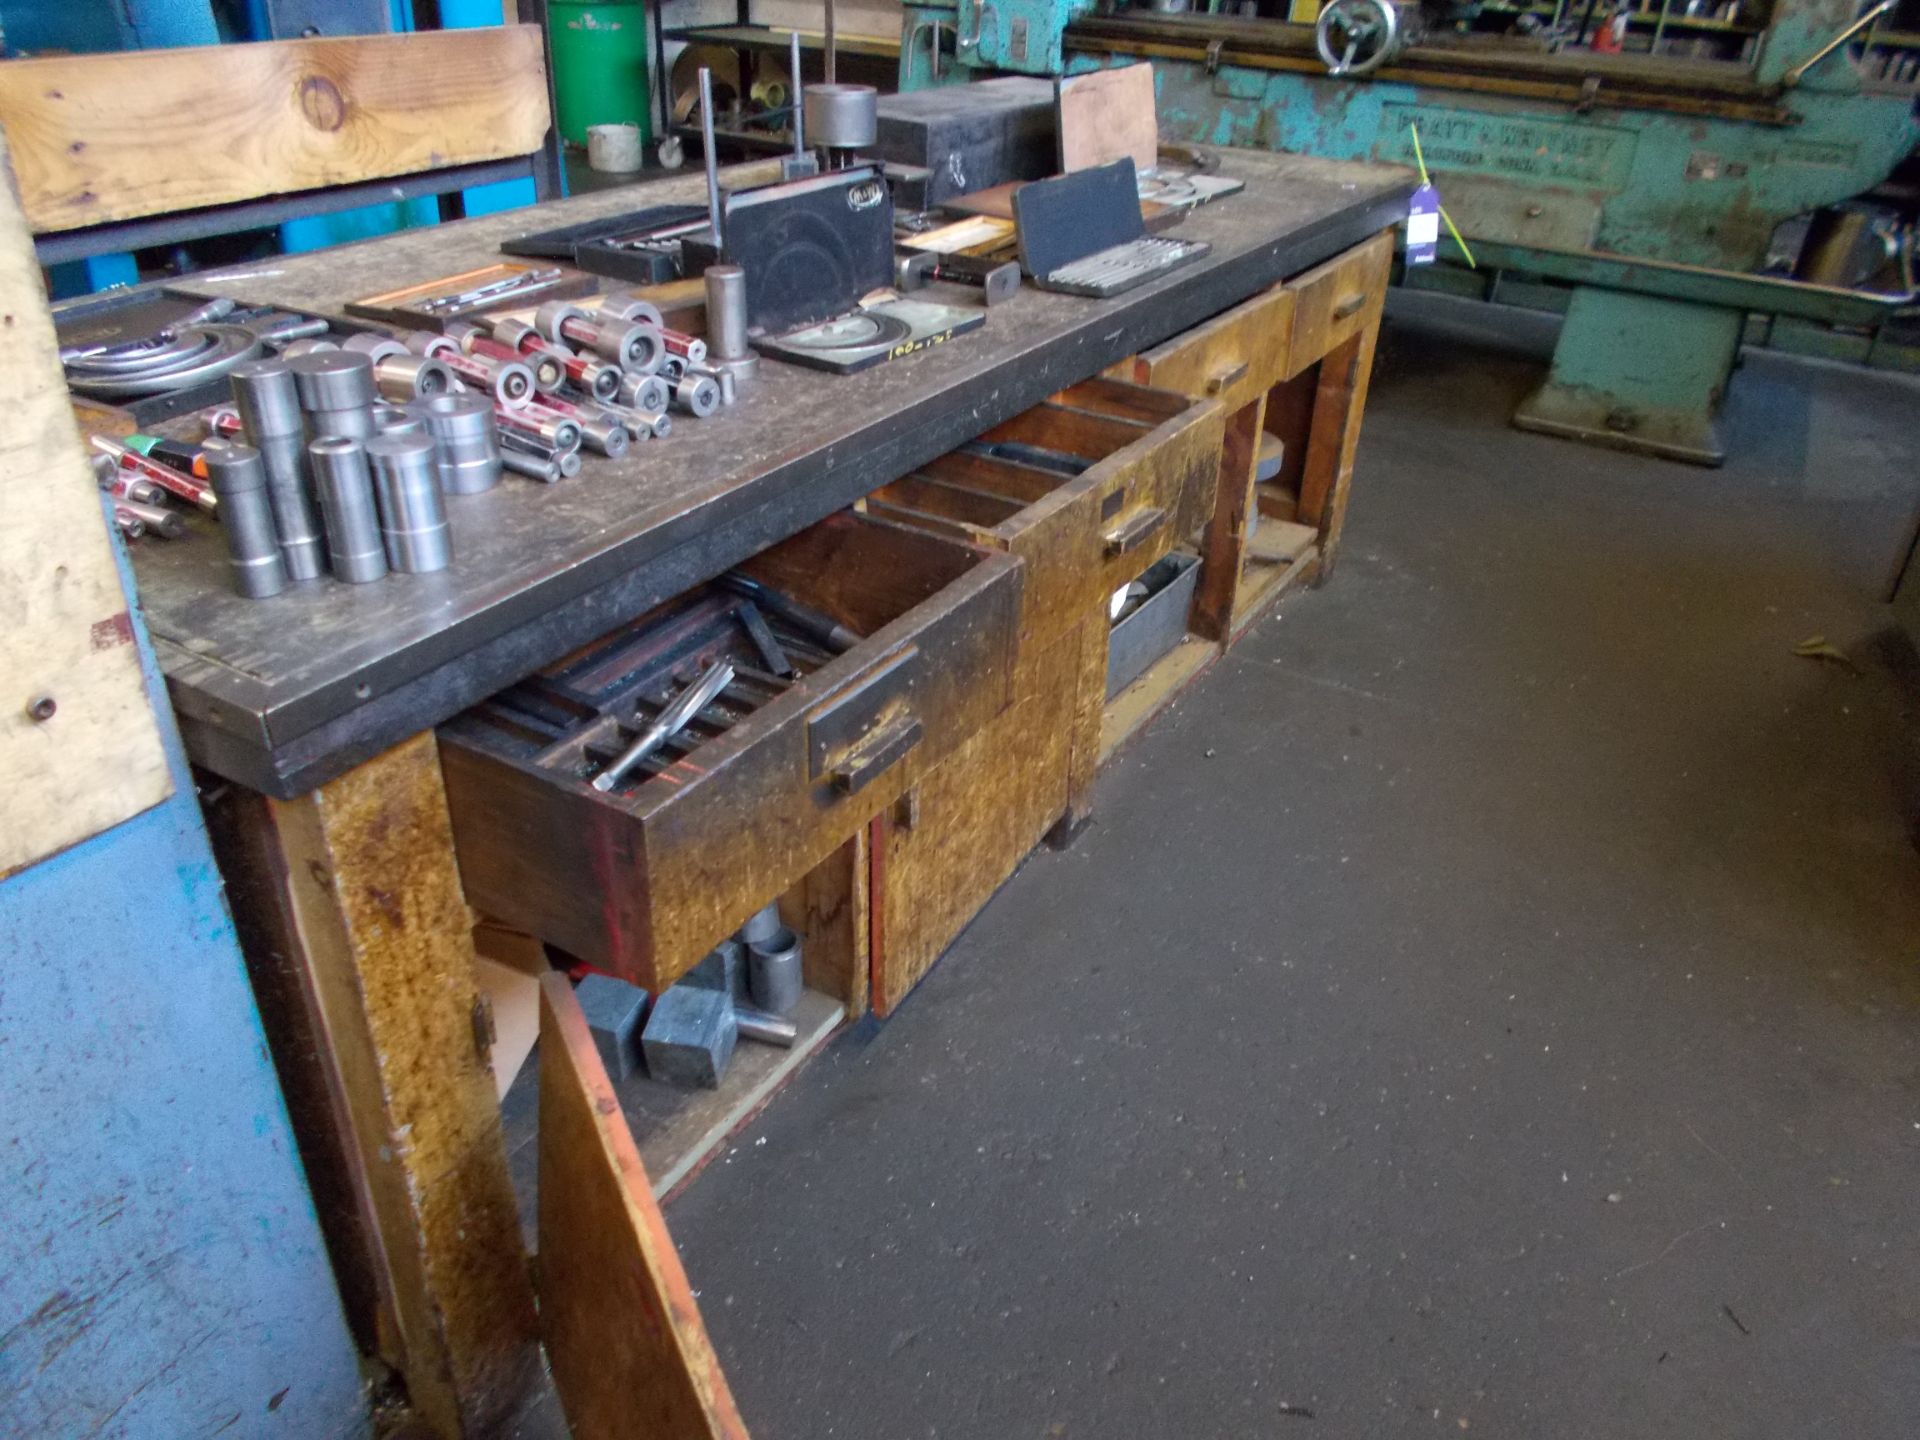 Workbench and contents including twist drills, reamers, grinding wheels, and rack and contents